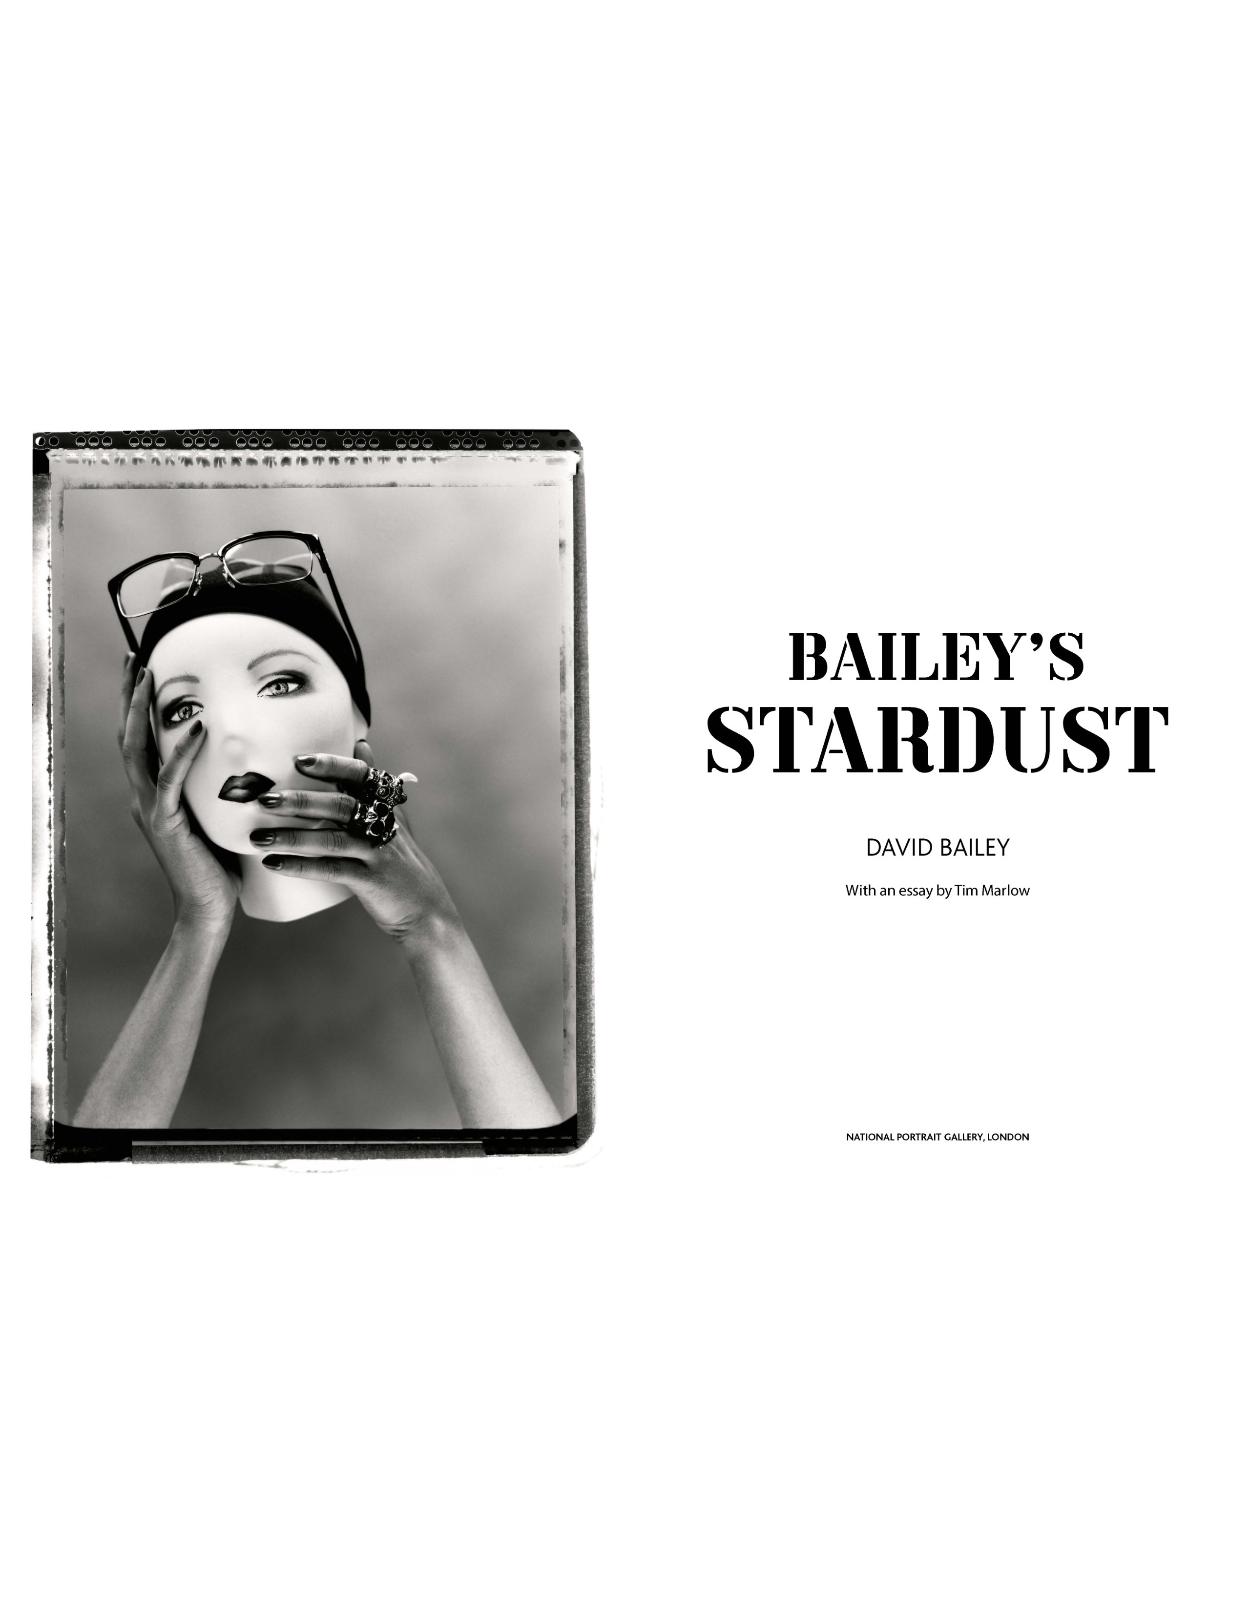 Bailey's Stardust (National Gallery of Scotland: Exhibition Catalogues)